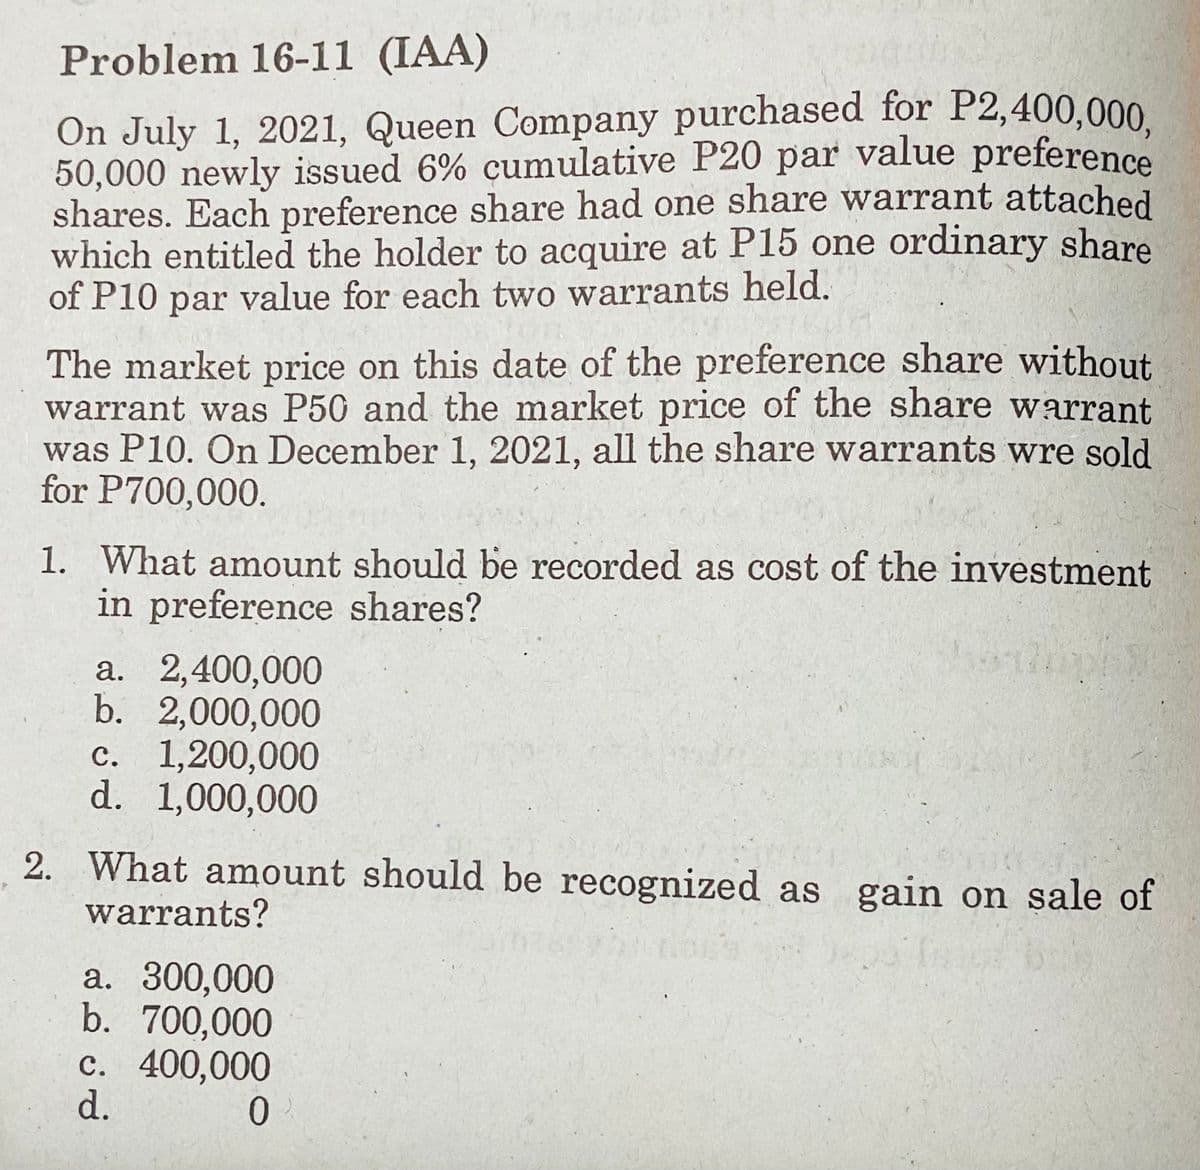 Problem 16-11 (IAA)
On July 1, 2021, Queen Company purchased for P2,400,000
50,000 newly issued 6% cumulative P20 par value preference
shares. Each preference share had one share warrant attached
which entitled the holder to acquire at P15 one ordinary share
of P10 par value for each two warrants held.
The market price on this date of the preference share without
warrant was P50 and the market price of the share warrant
was P10. On December 1, 2021, all the share warrants wre sold
for P700,000.
1. What amount should be recorded as cost of the investment
in preference shares?
a. 2,400,000
b. 2,000,000
c. 1,200,000
d. 1,000,000
2. What amount should be recognized as gain on sale of
warrants?
a. 300,000
b. 700,000
c. 400,000
d.
0.
